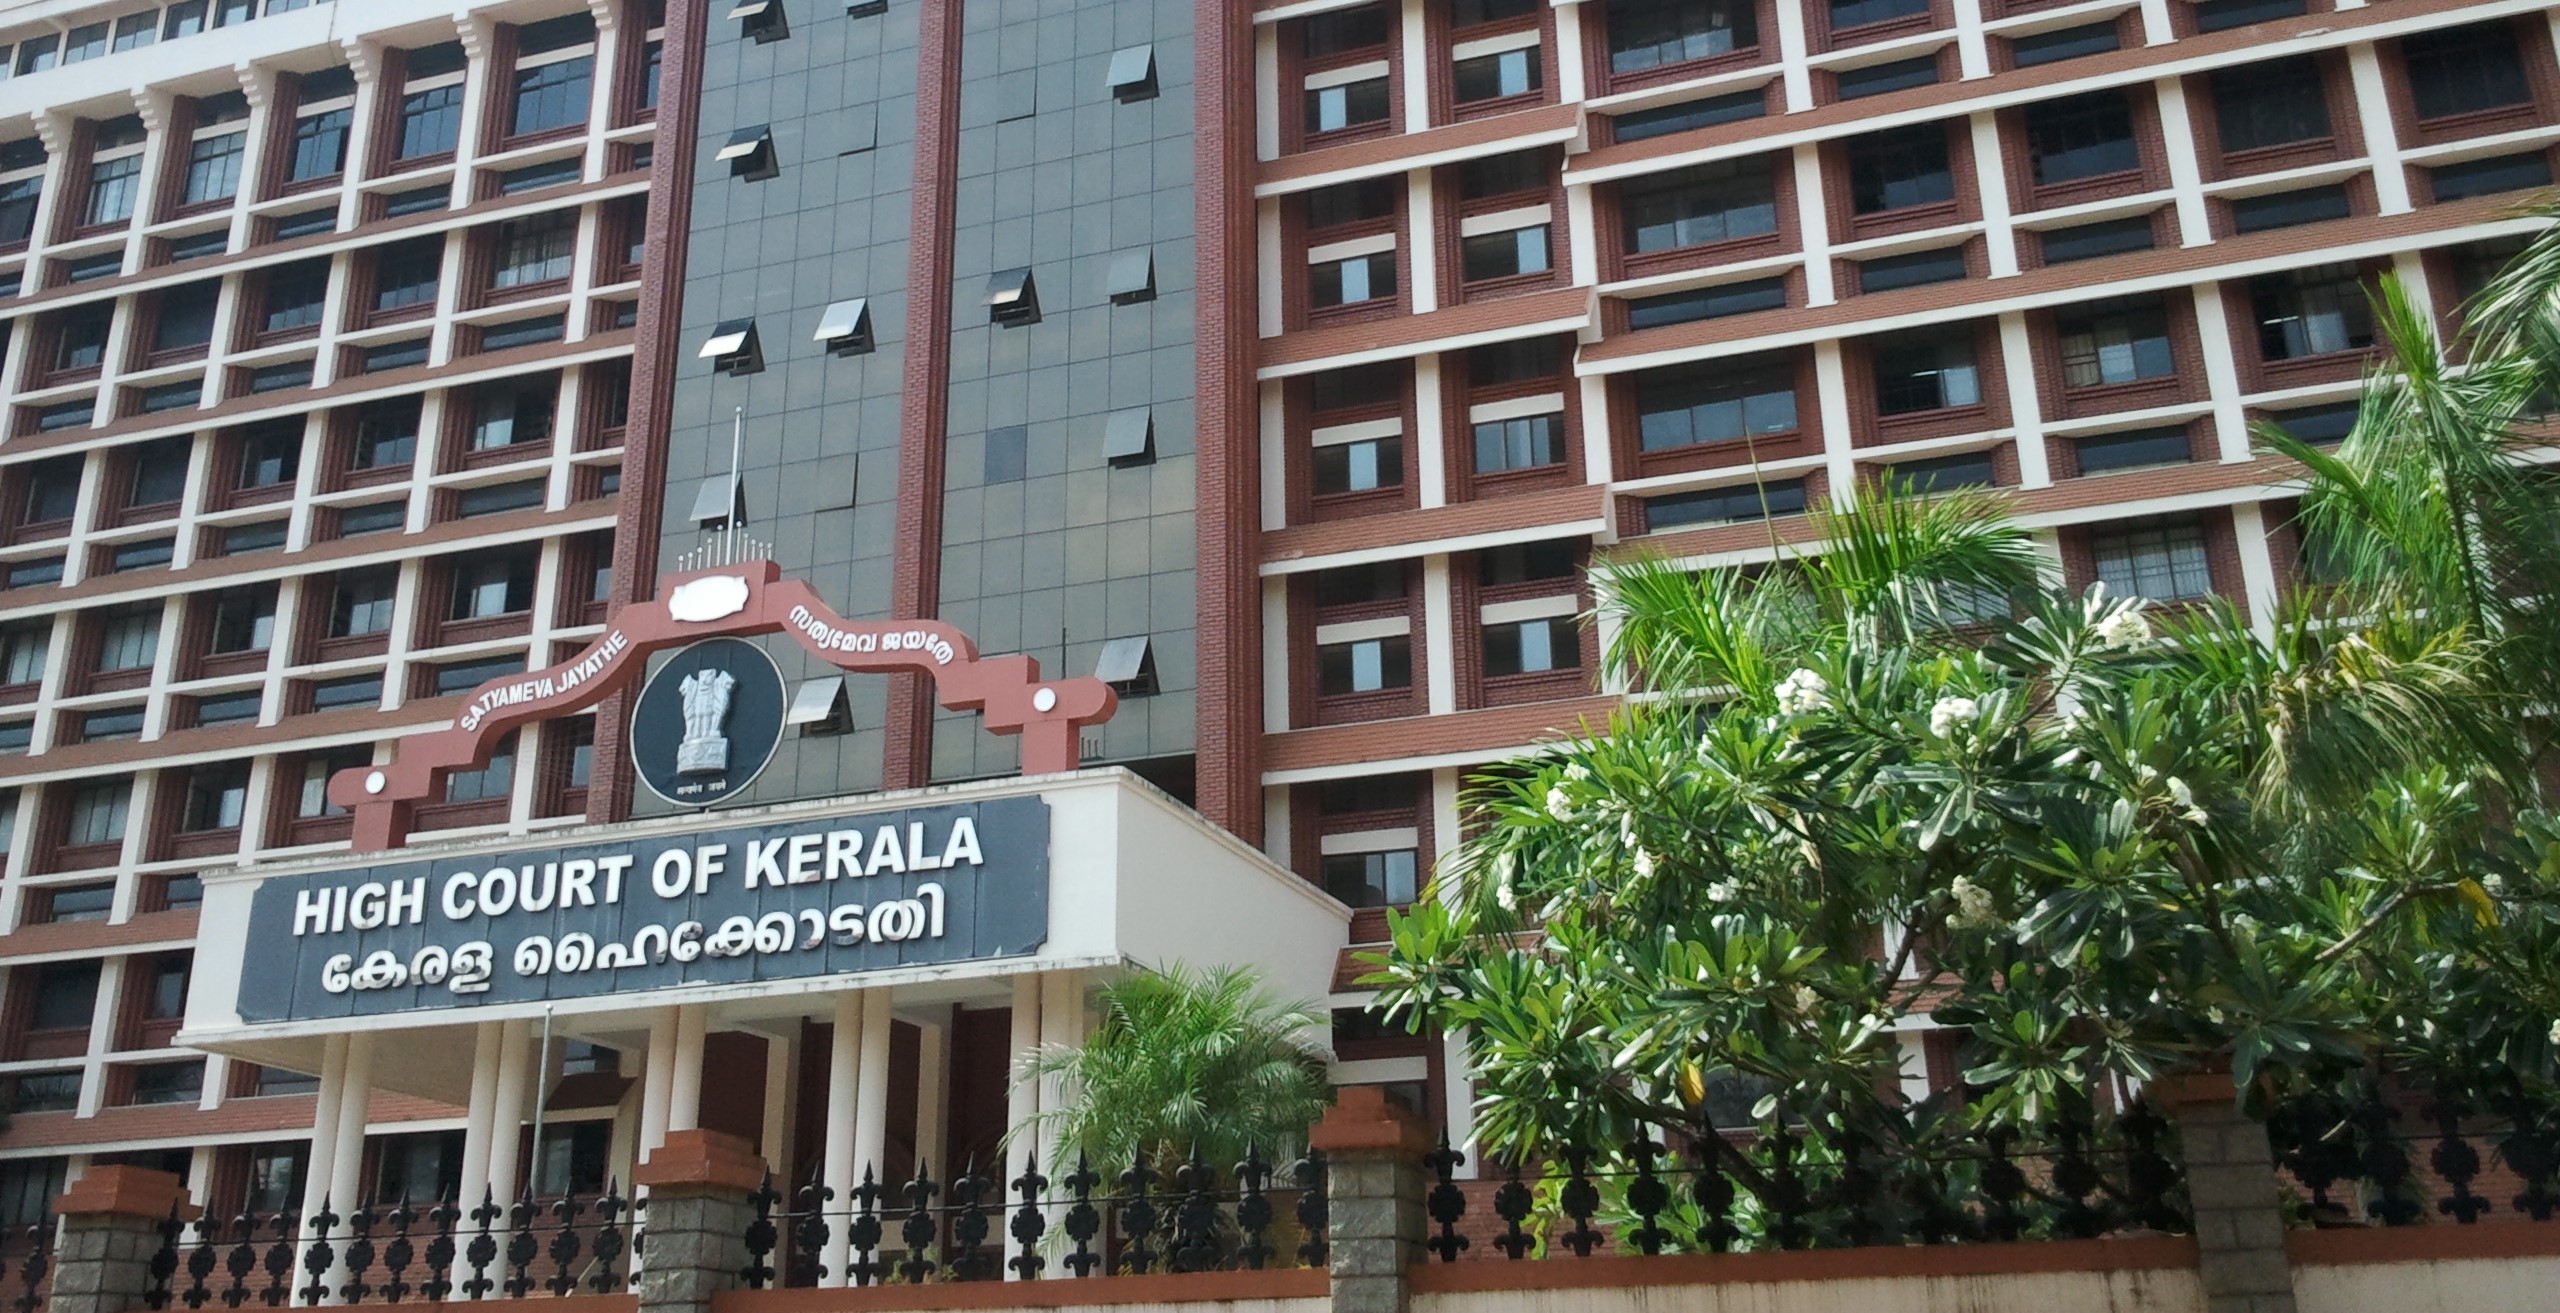 Process for building court complex at Idukki shows sorry state of affairs due to red tape: Kerala HC